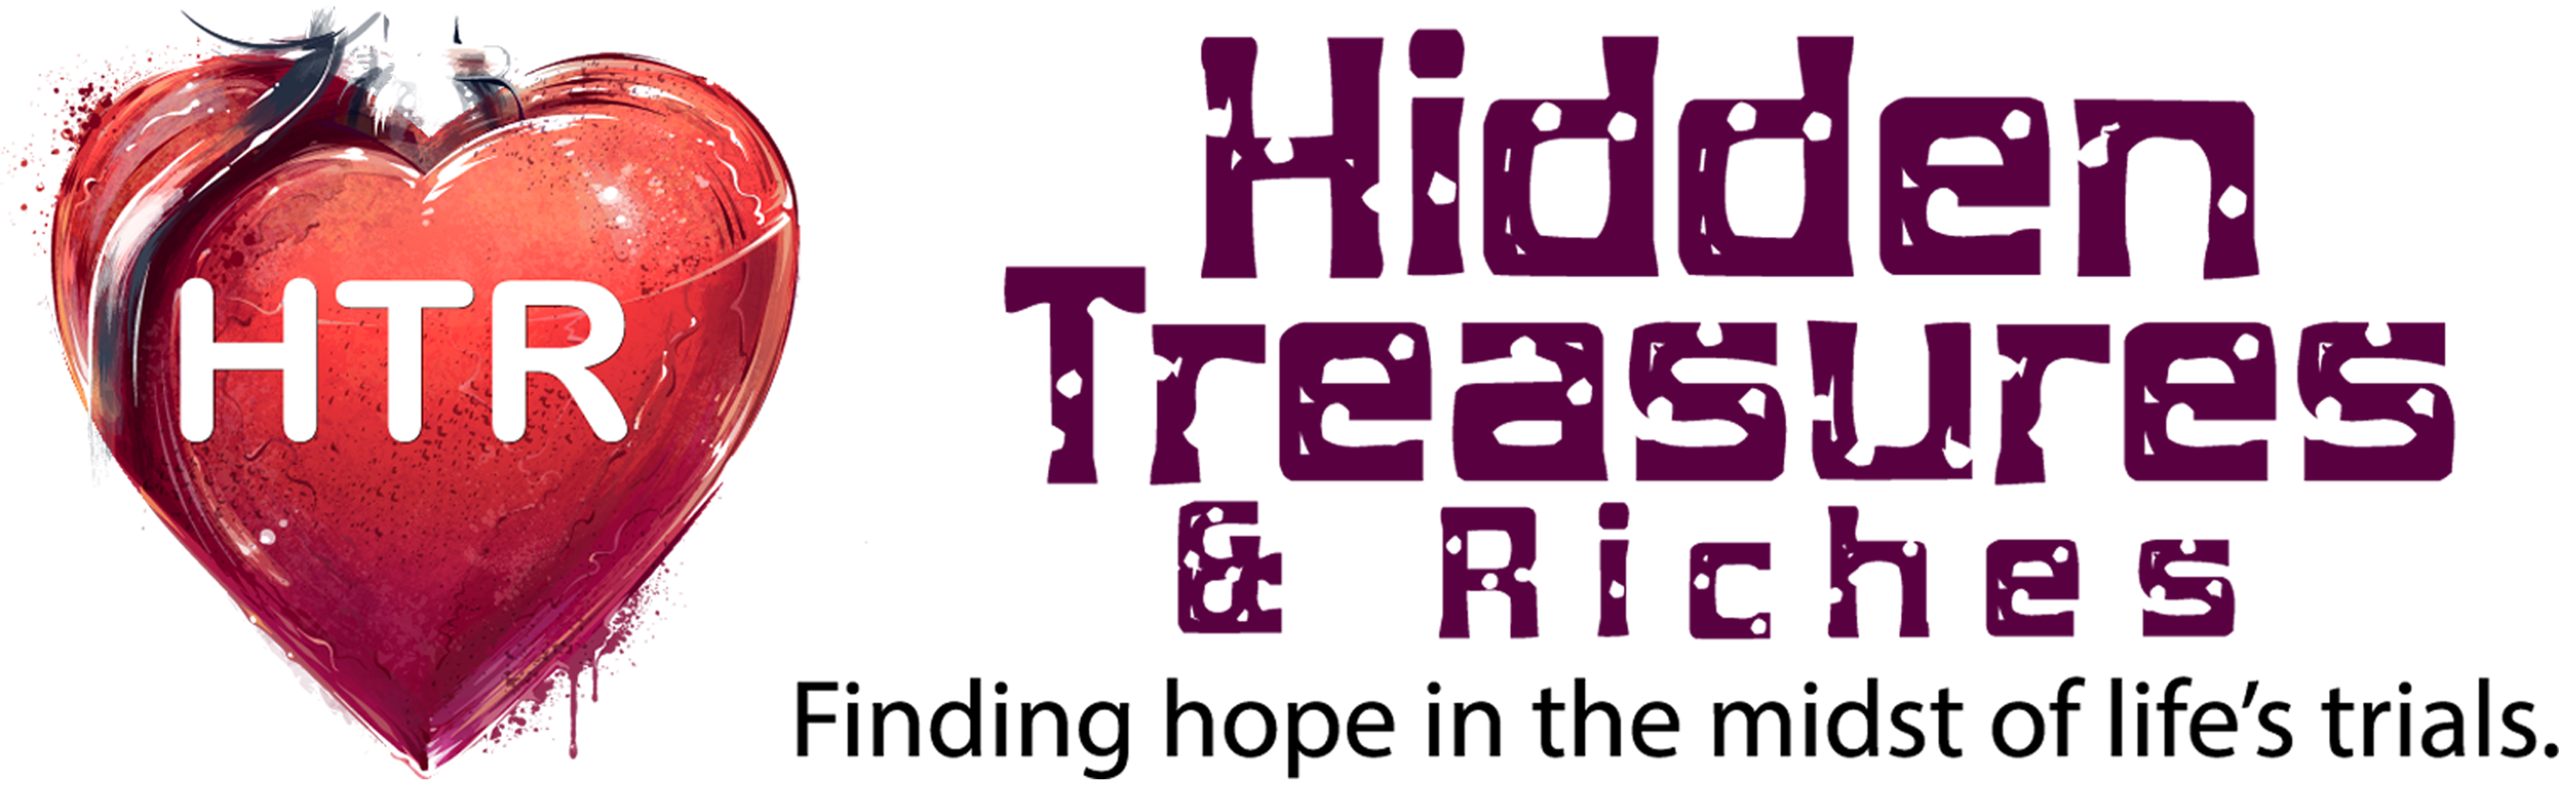 Home - Hidden Treasures and Riches